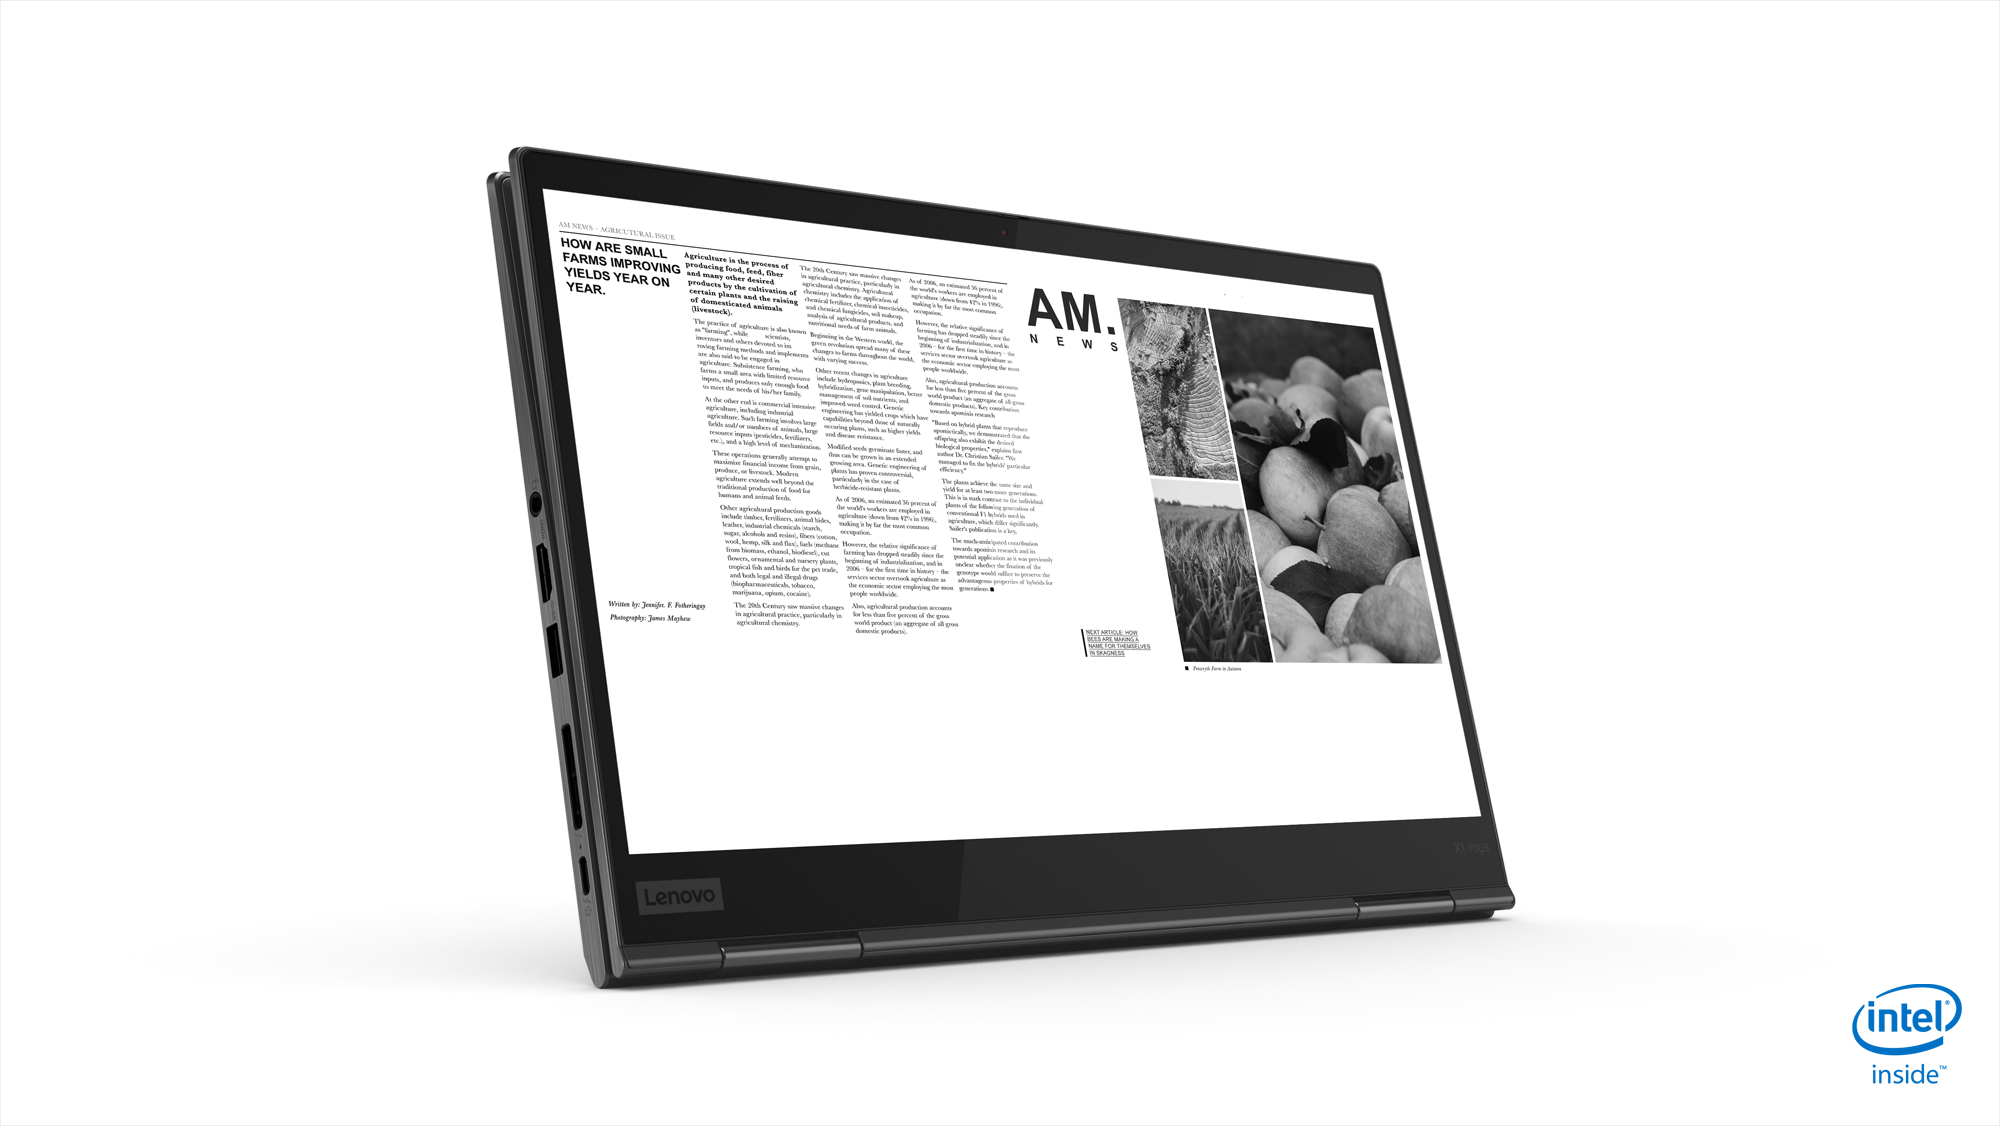 lenovo updated thinkpad x1 carbon yoga ces 2019 09 hero tablet horizontal front facing